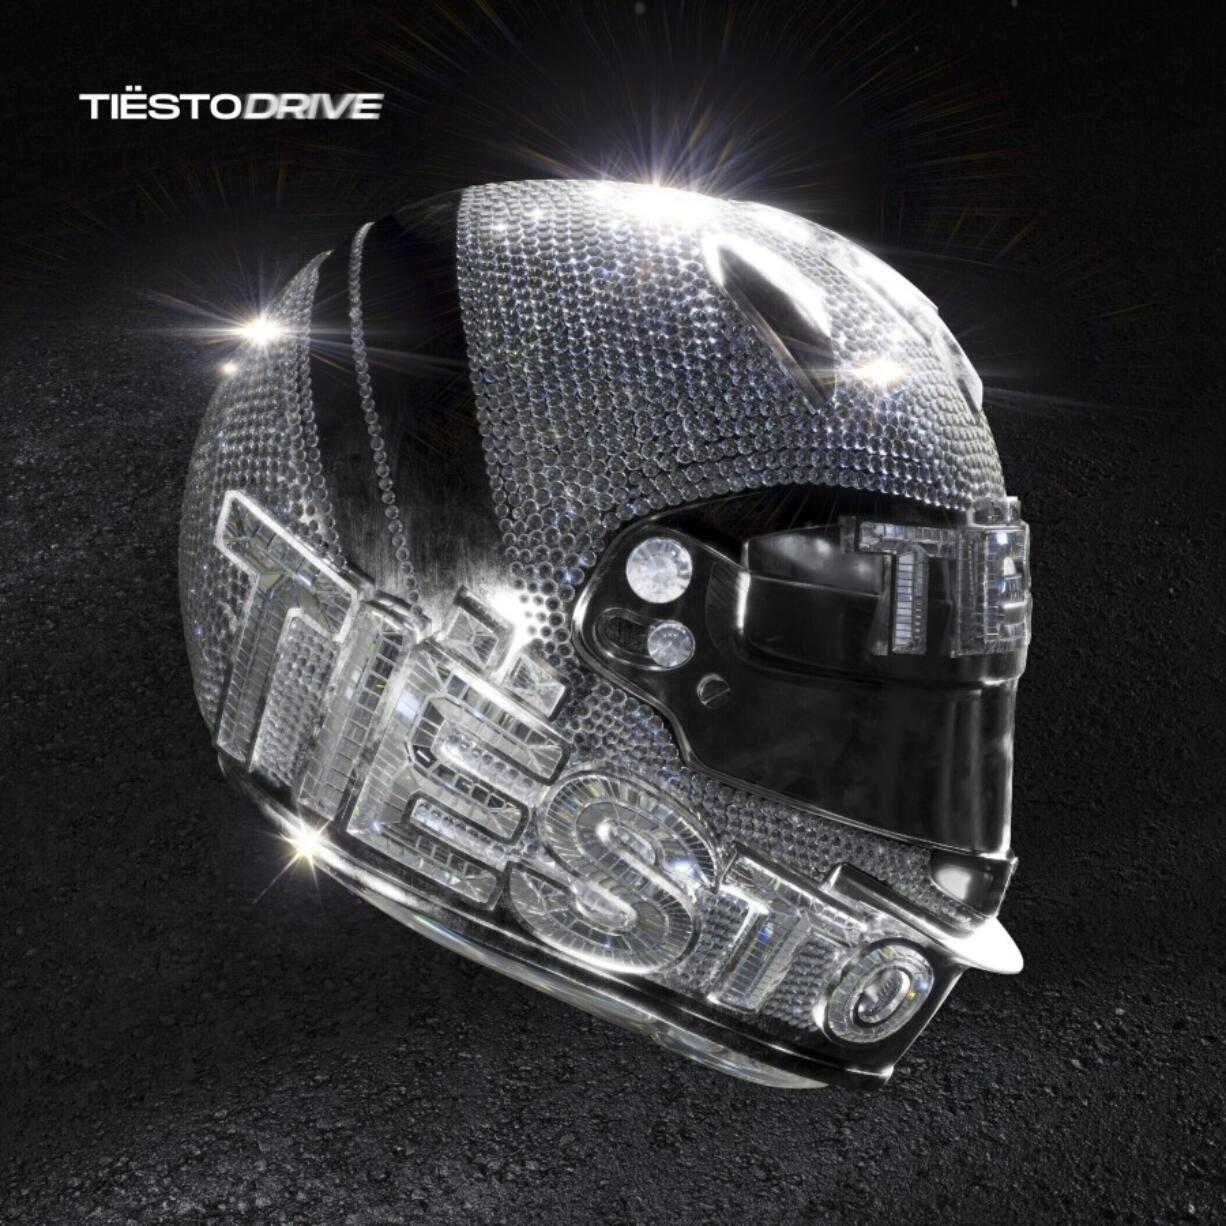 This cover image of lifelong Formula One fan Ti&euml;sto. In some ways, the album &ldquo;Drive&rdquo; centers on the concept of driving and F1.